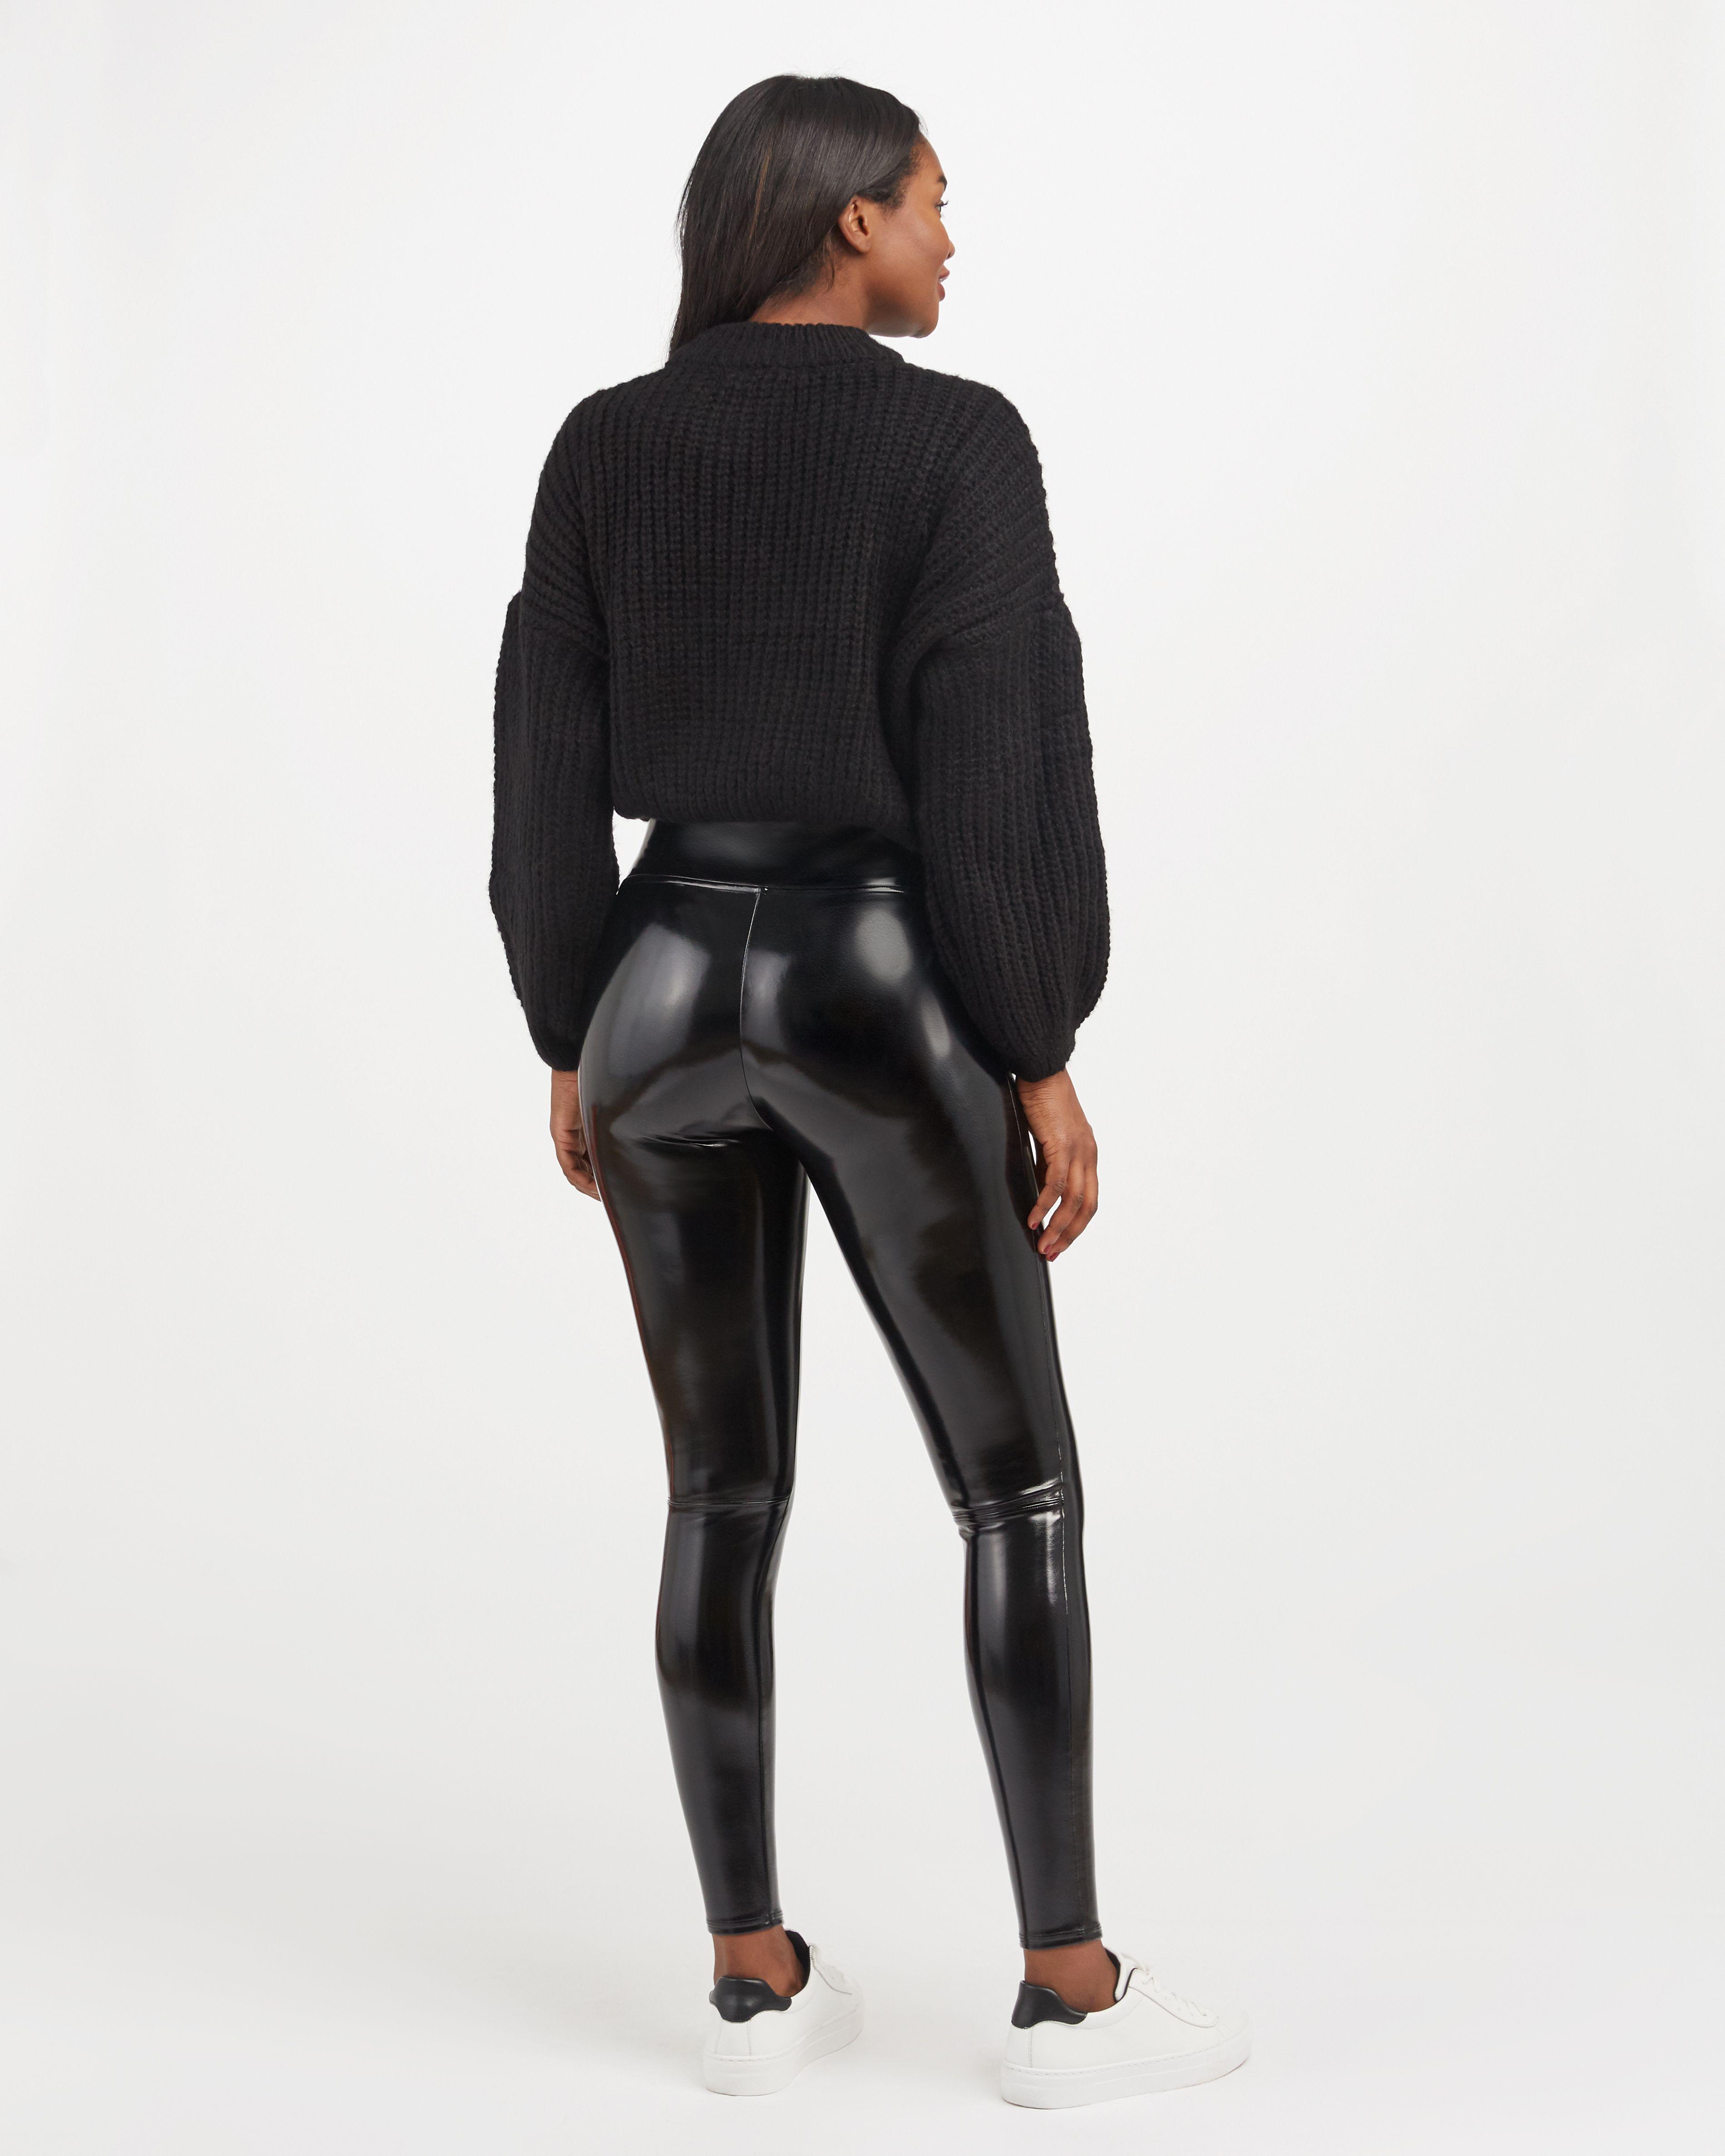 Spanx Leather Look Leggings Reviewers  International Society of Precision  Agriculture